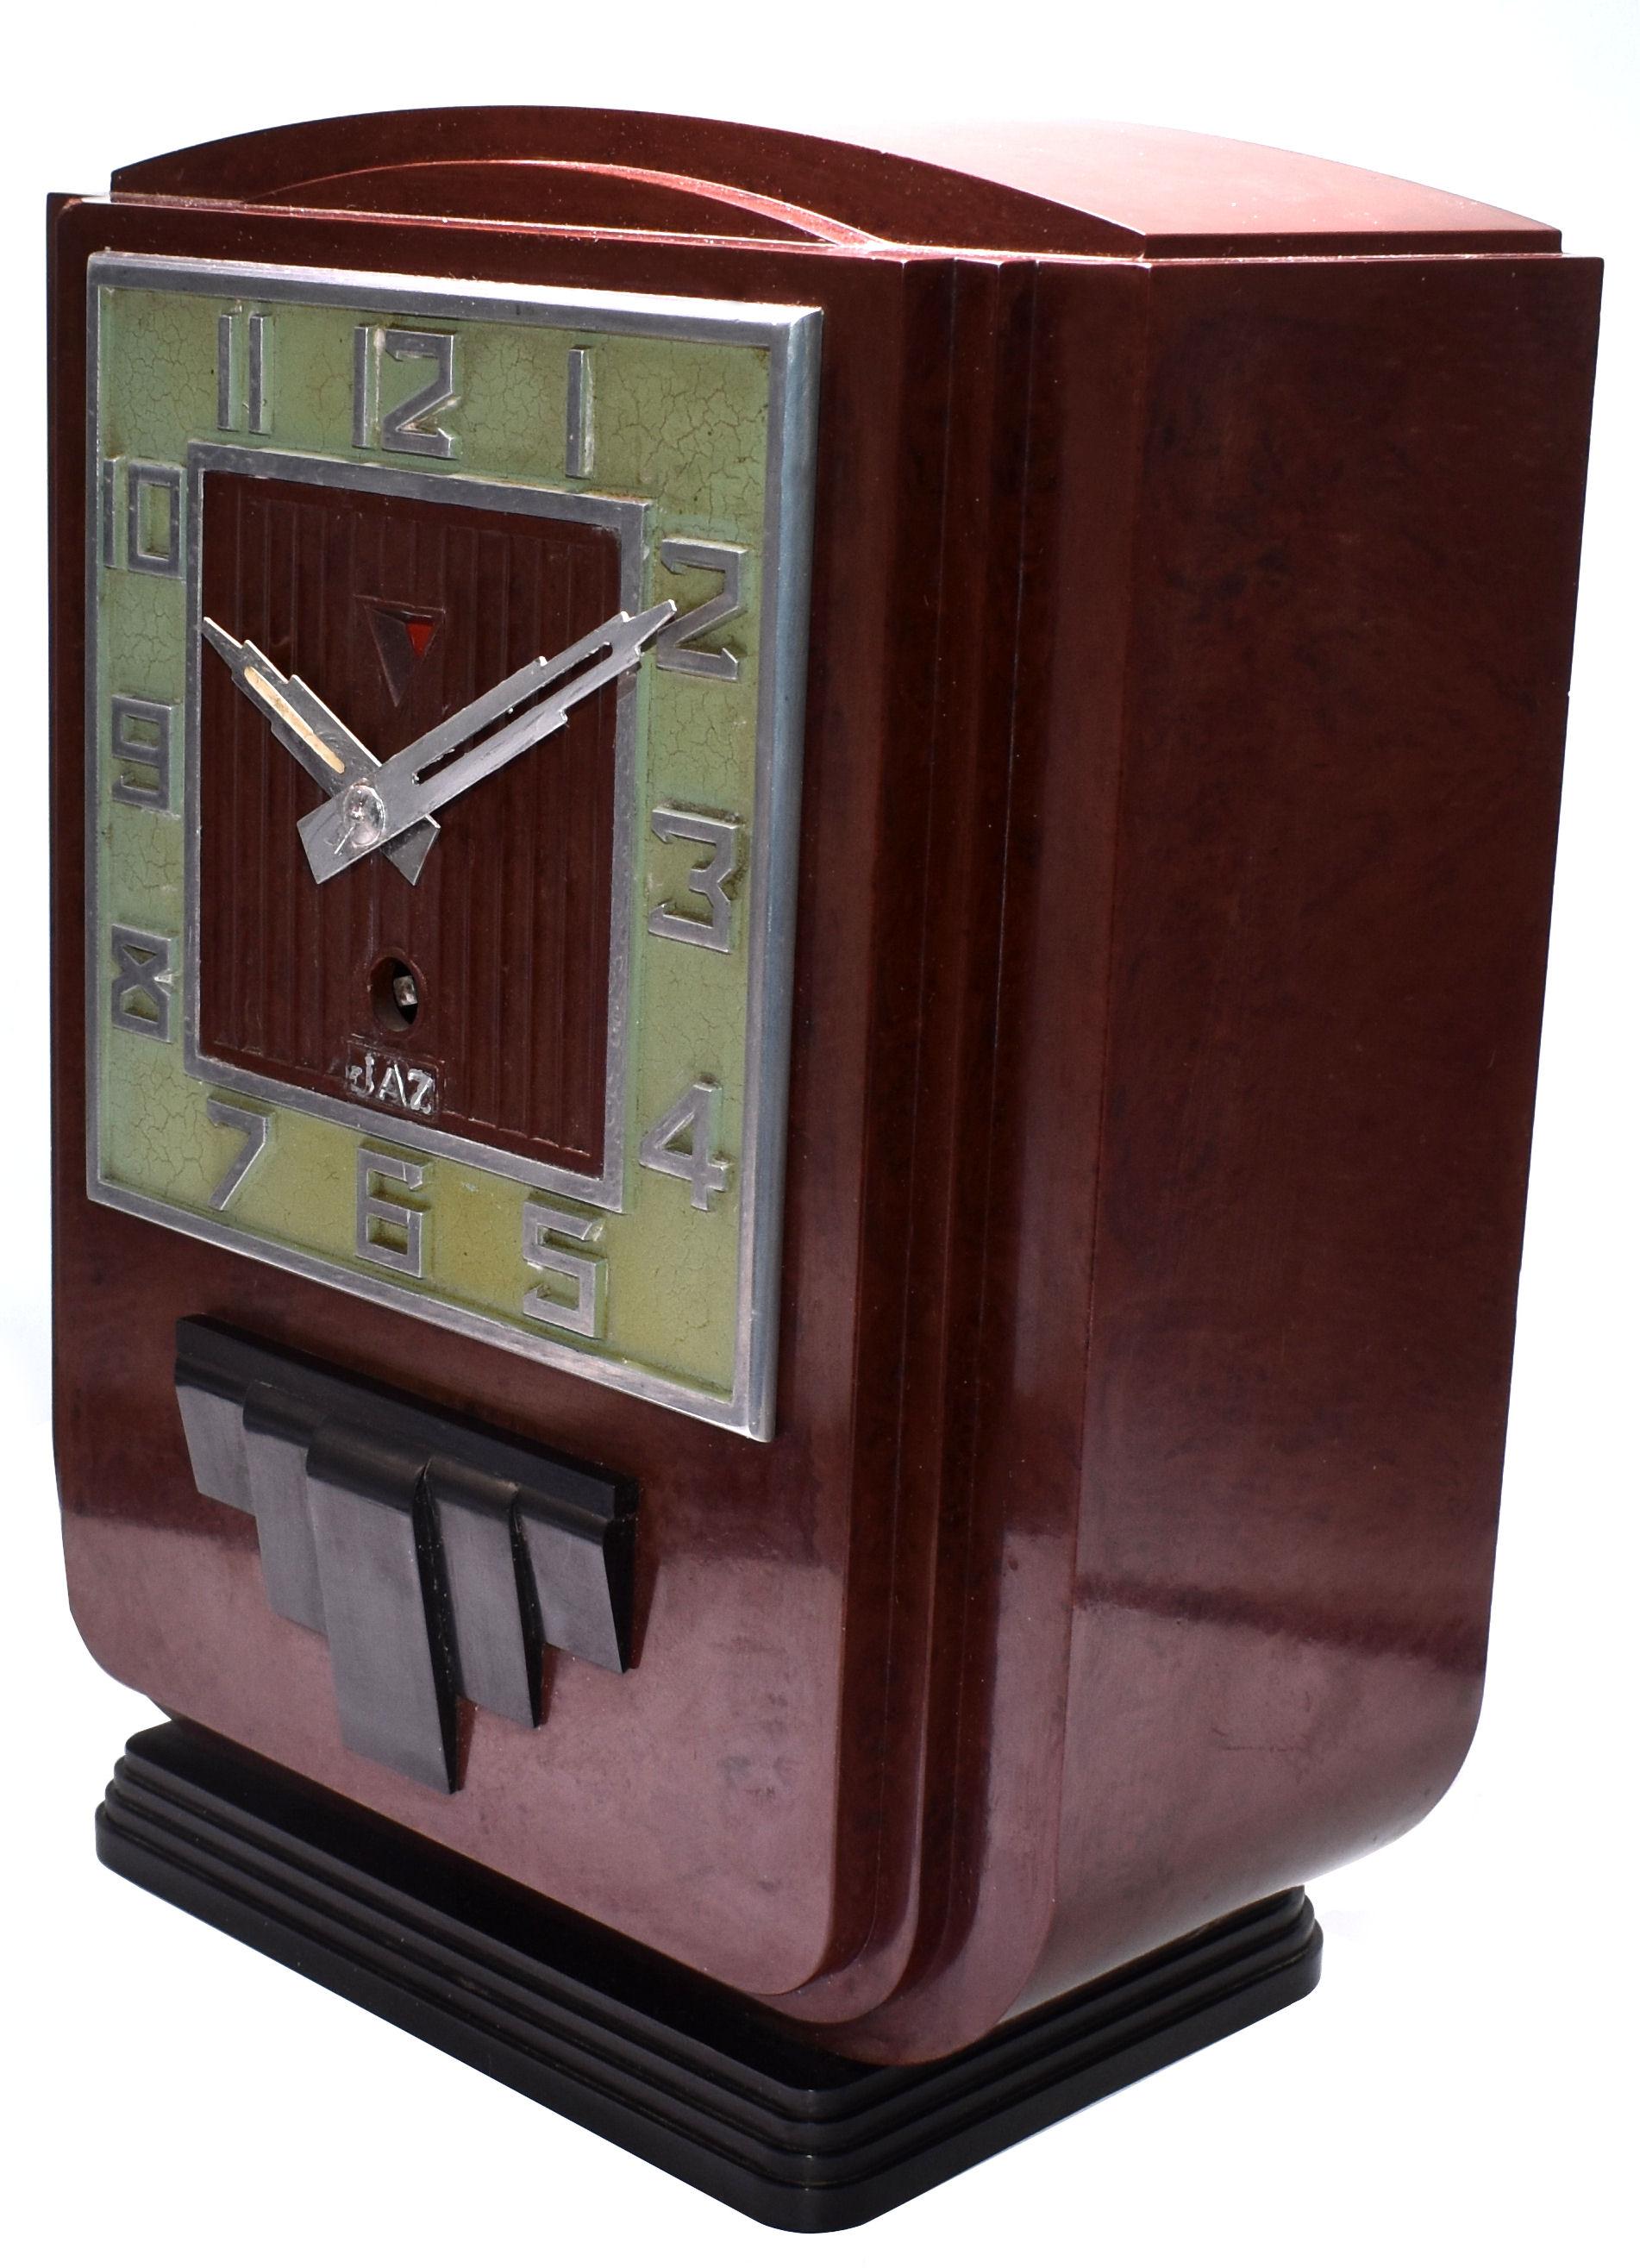 This is the daddy of true 1930s Art Deco clocks. Made in France by the very collectable JAZ Company, this clock screams everything about the Deco era we all love and admire, streamline, Industrial and modernist. The casing is a red mottled color,